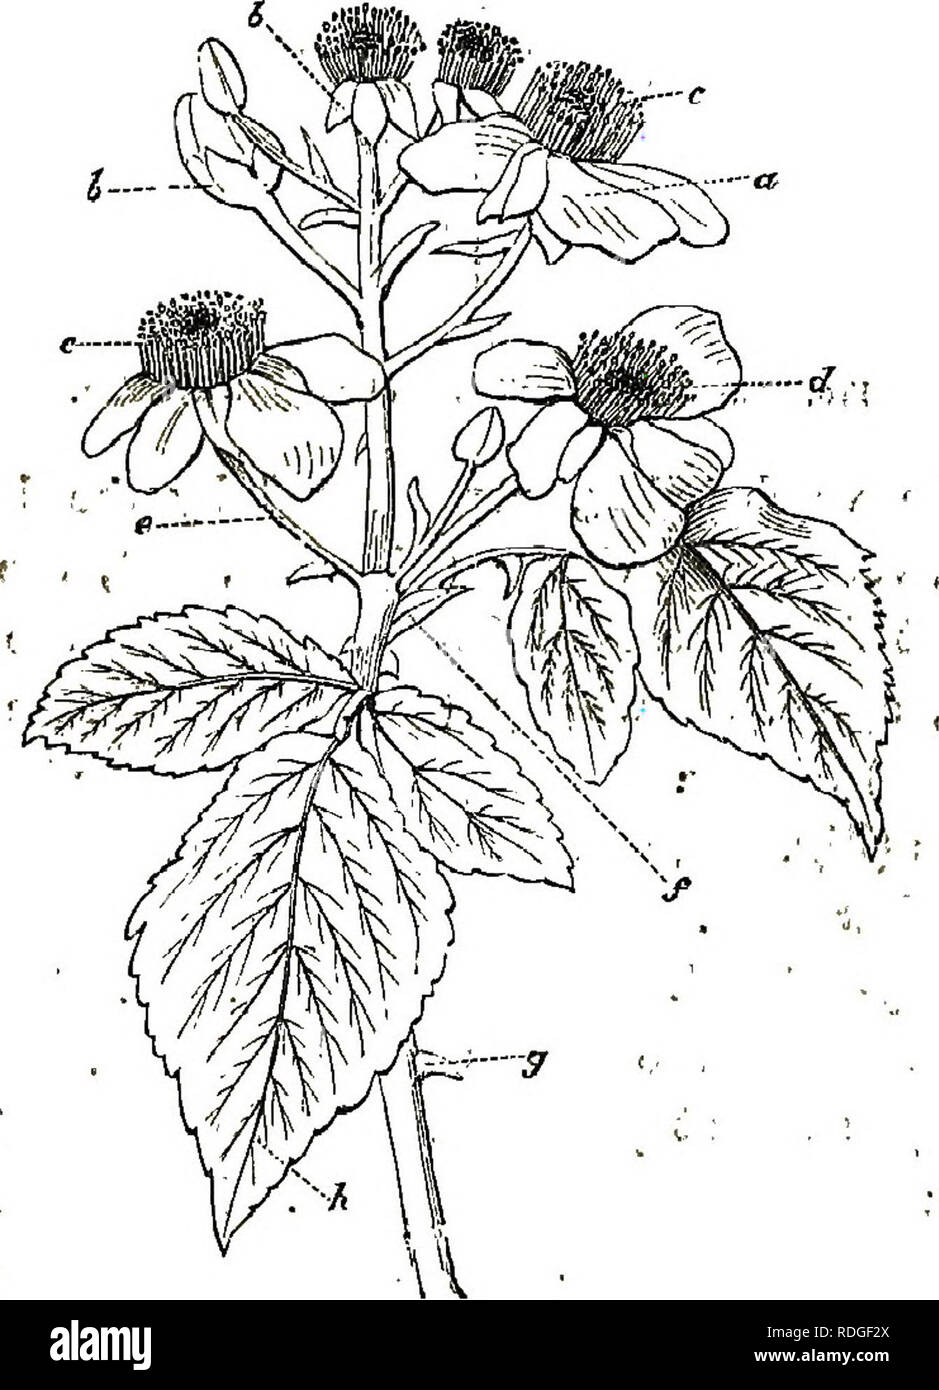 . Wayside weeds, or, Botanical lessons from the lanes and hedgerows : with a chapter on classification . Botany; Wild flowers. WAYSIDE; WBEDSv S5, â â ^we #aat tiie 'kind of plant for our present fjur;^ ;^OBe^Fig'. 30);. anfl, if you liave no'other cMncoj go into^ tie ]s:itcli*eii-g*r^6ji, aitd pluck' a flowering ..? i.. v.! Fi9. 29.âCollection of Blossoms of common BmnlWle, orrsngAd in a eolymb: ' Â«, petals; 5, calyx sepals'; o,. stamens; (Jâpistils j e', ppdicels;/, braotsj g^ setsB or bristles ; A, compound leaf. Sprig of celery, parsley, or carrot, or fentielj calling in, if necessary, tk Stock Photo